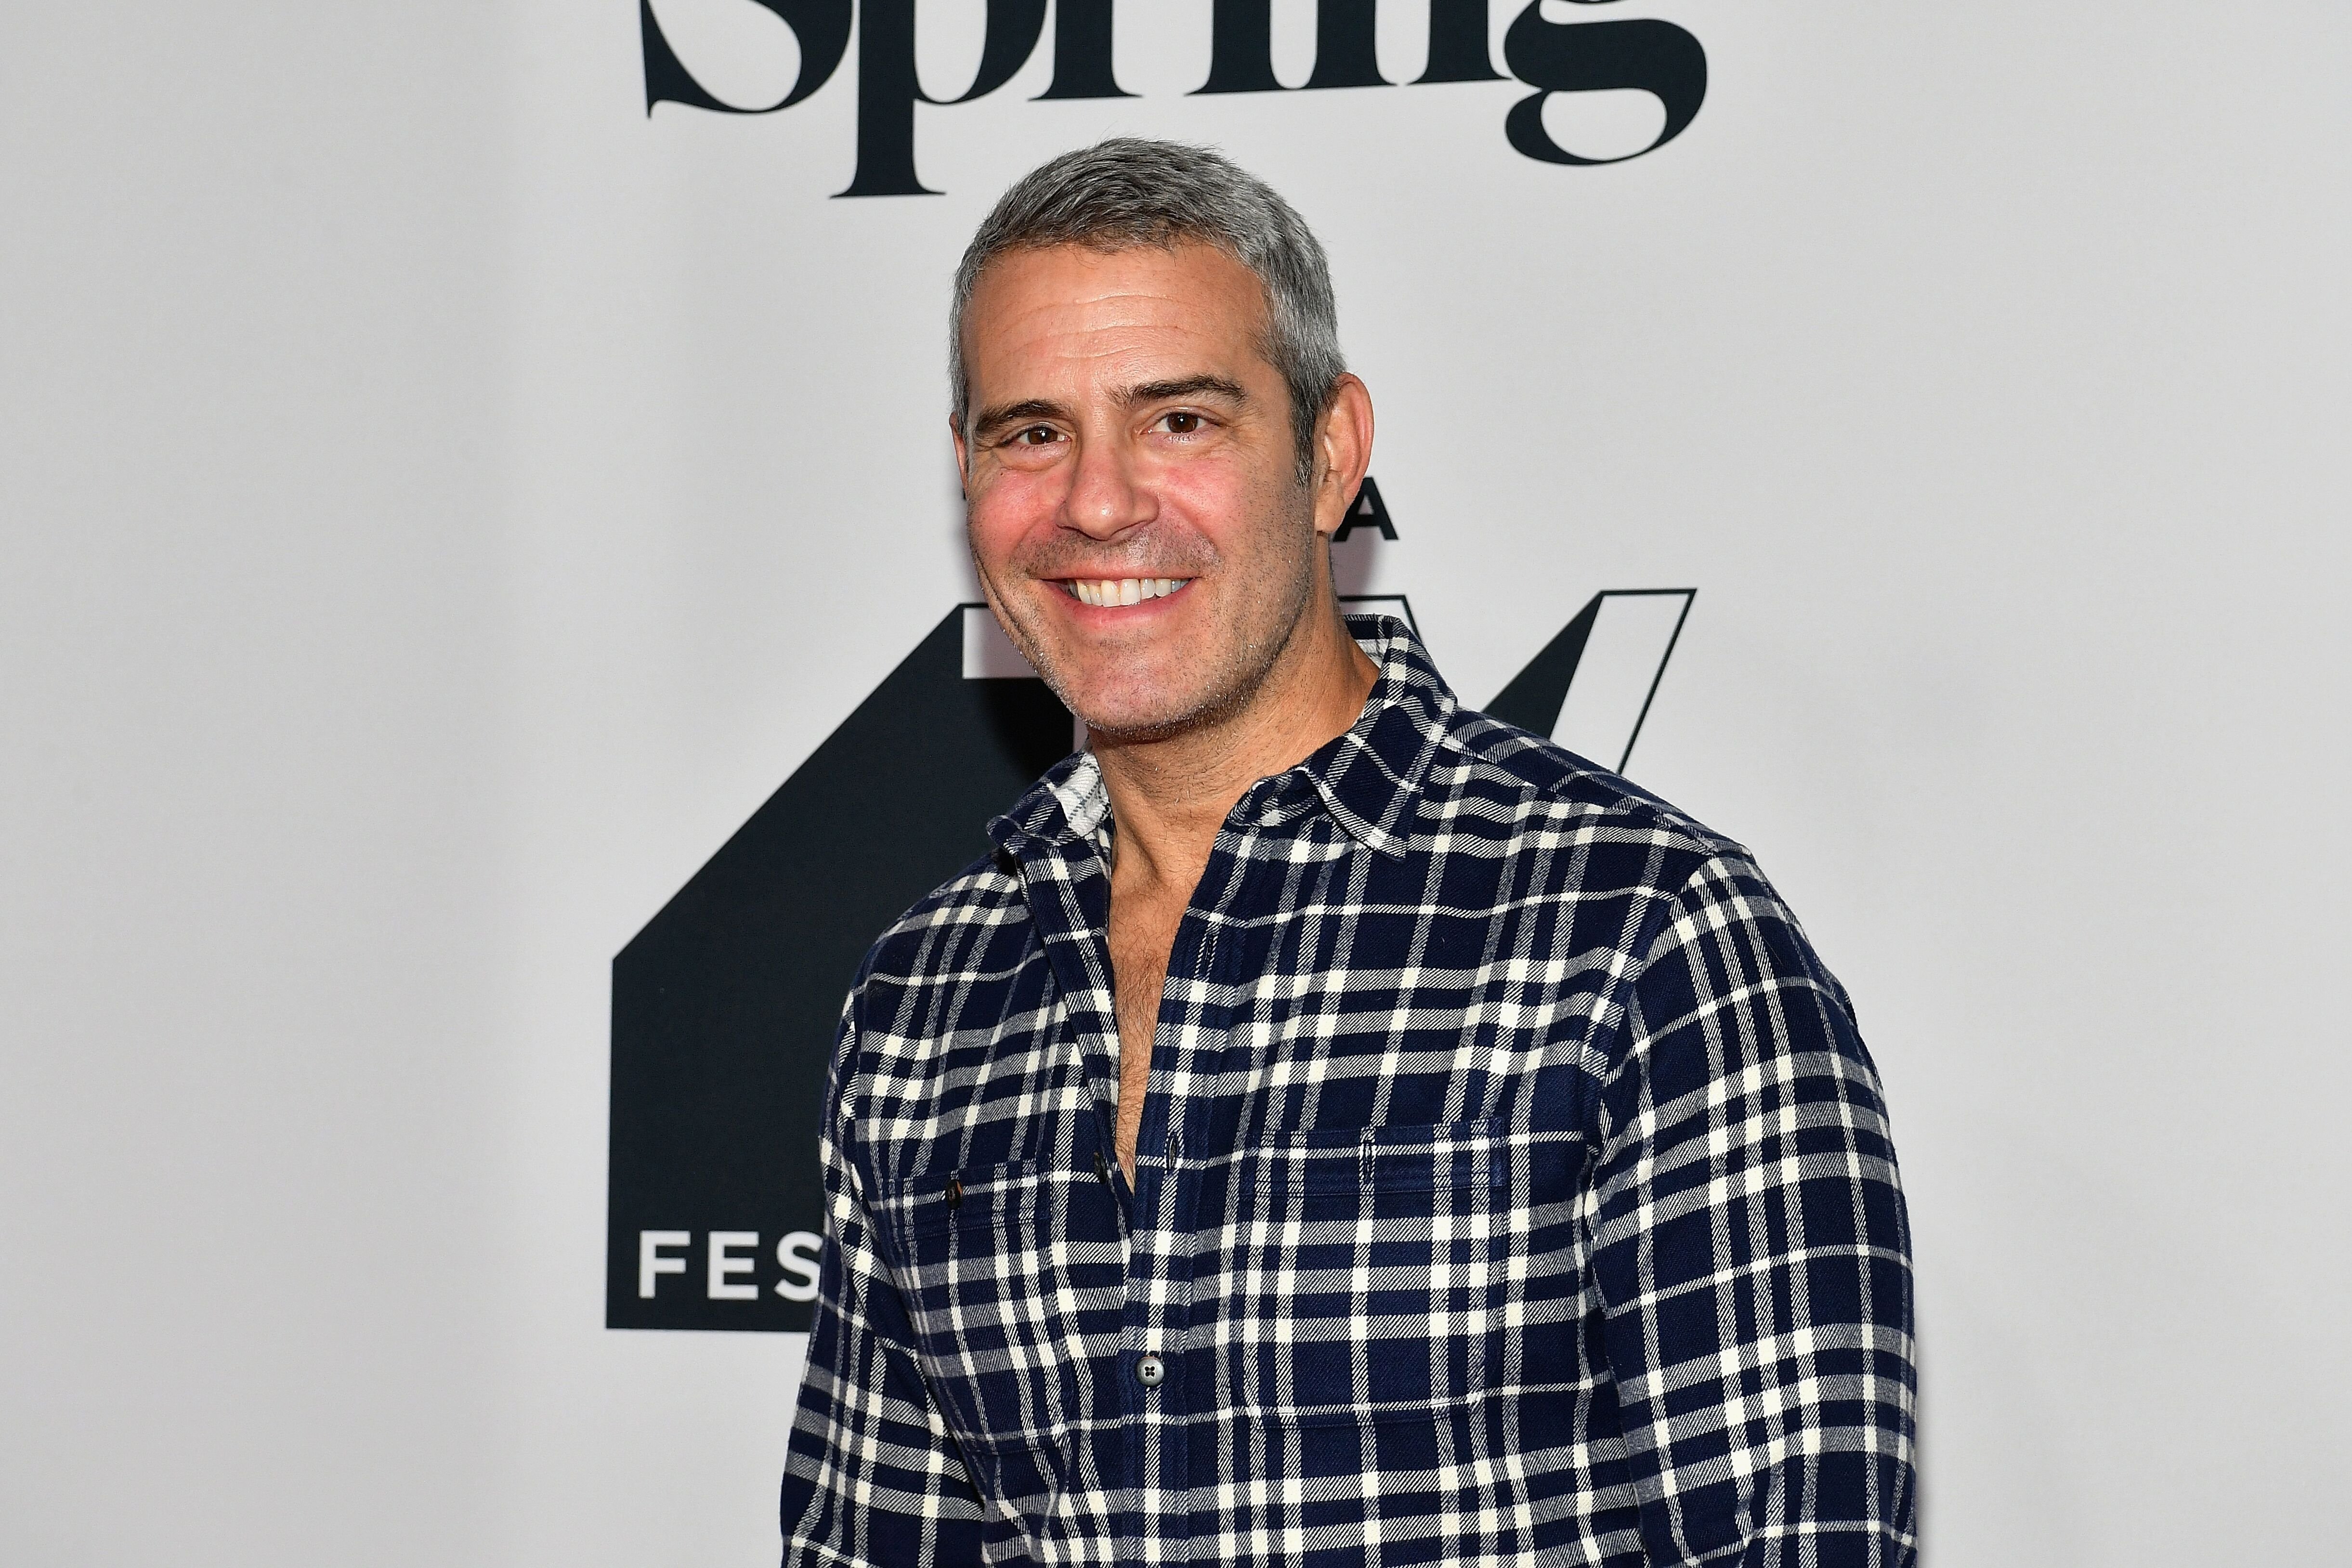 Andy Cohen attends the Tribeca talks panel during the 2018 Tribeca TV Festival at Spring Studios on September 23, 2018 in New York City. | Photo: Getty Images